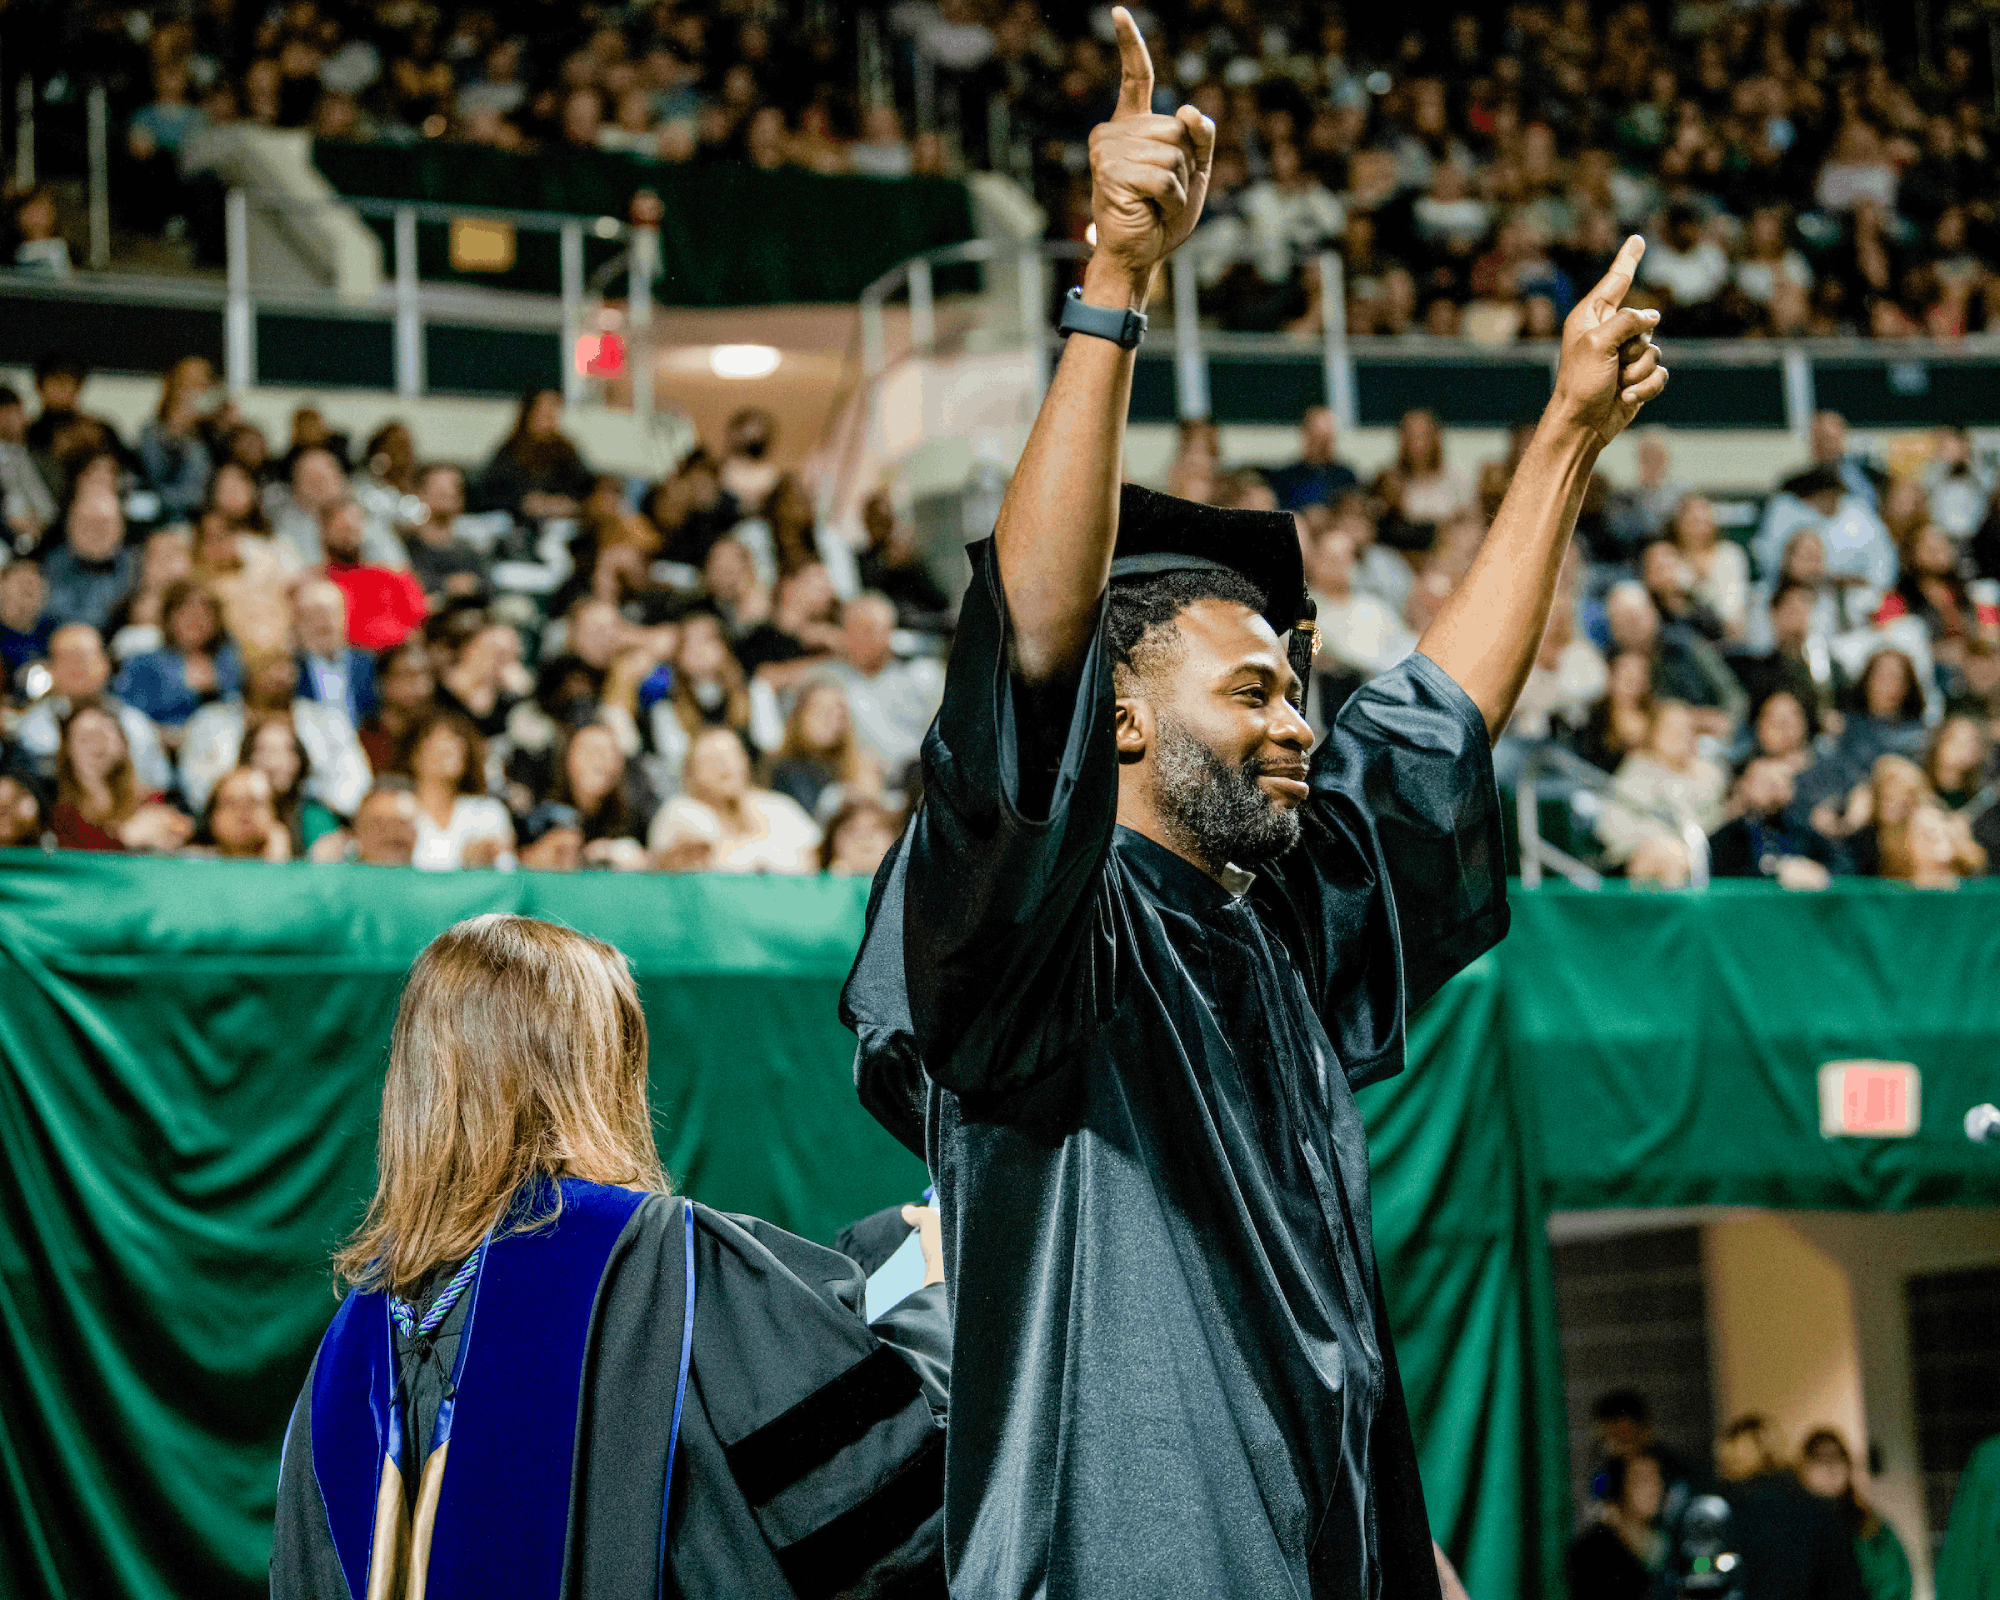 A graduate celebrates on stage at Fall Commencement.